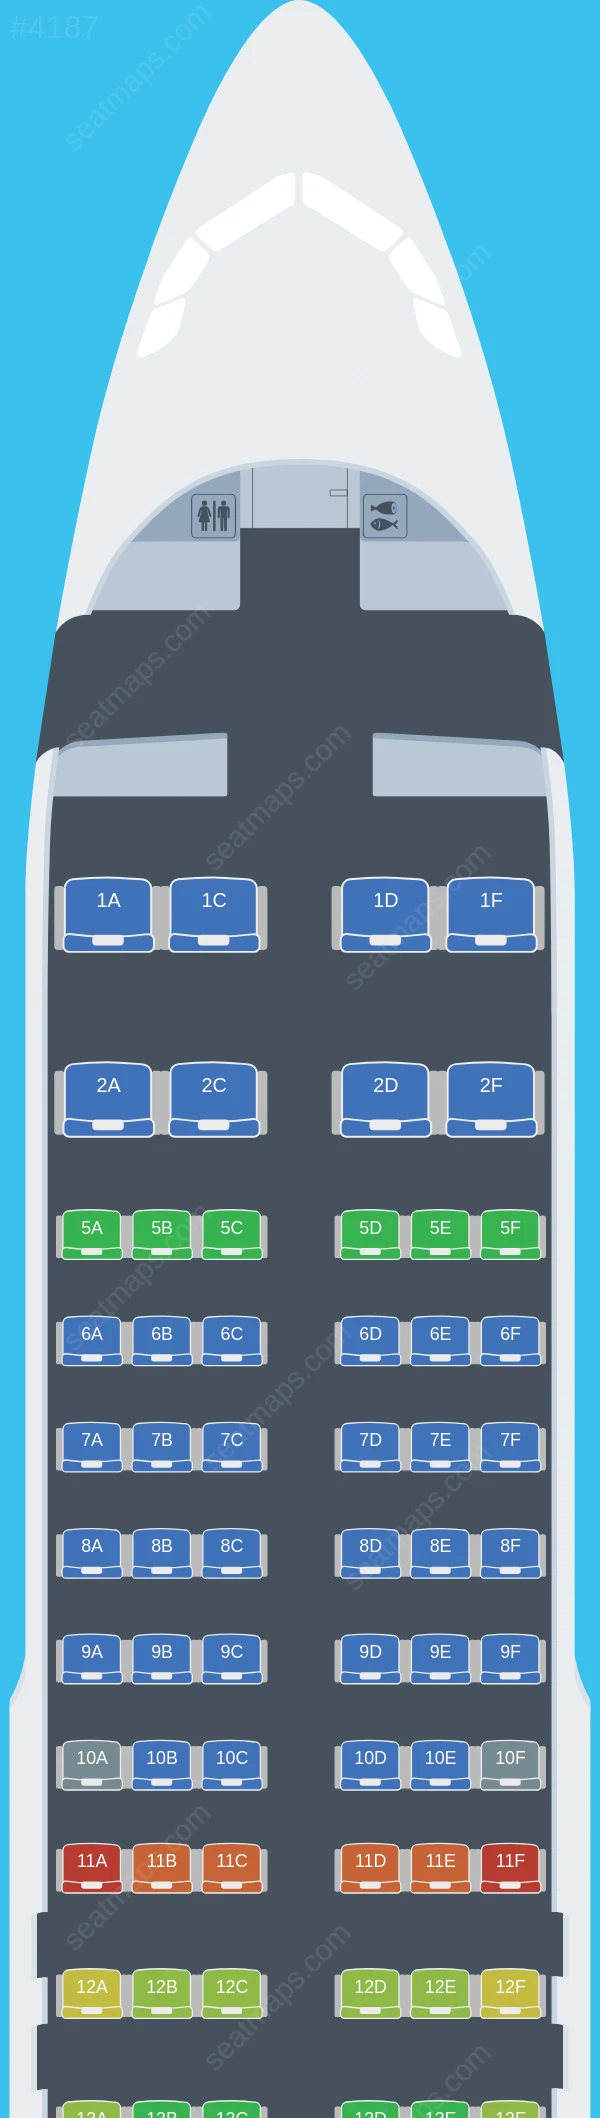 Flynas Airbus A320-200 seatmap preview